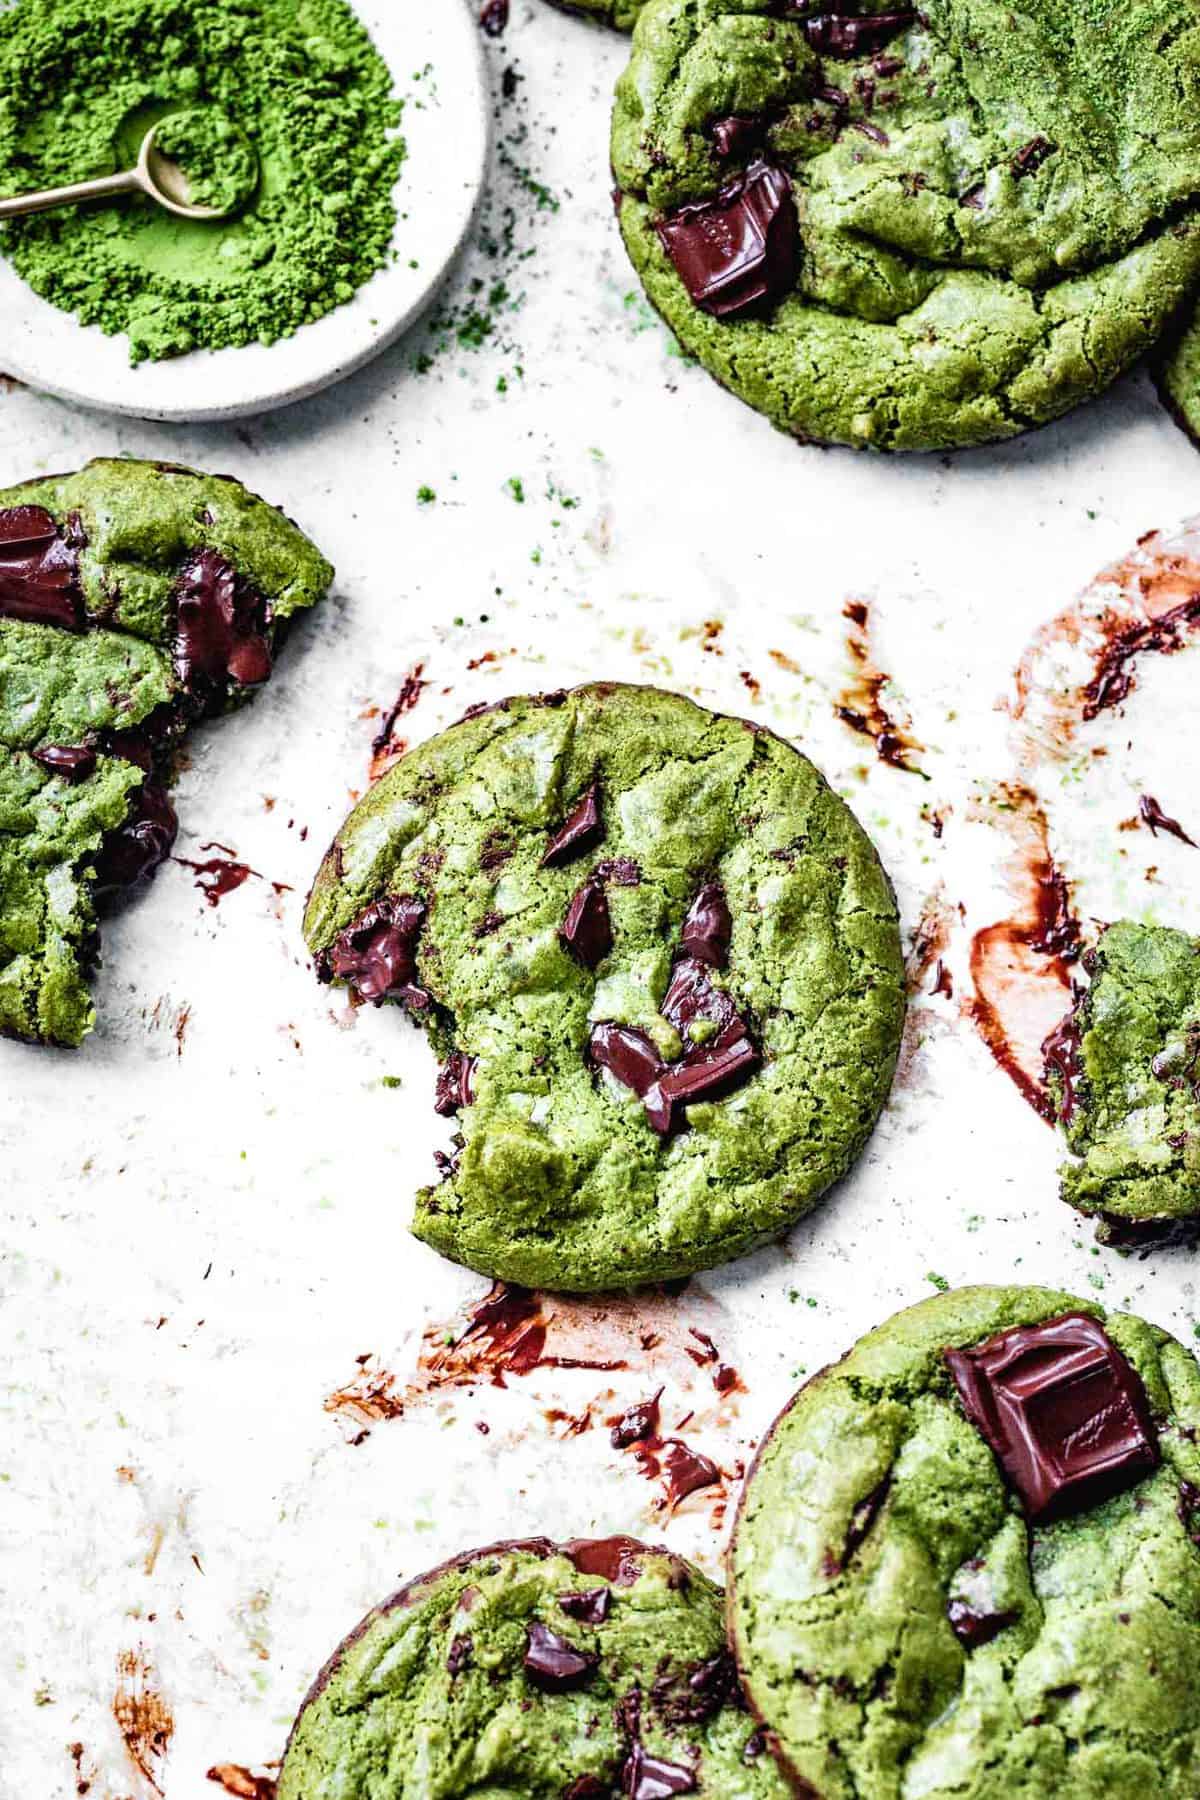 a messy piece of parchment smeared with chocolate has several gooey matcha chocolate chip cookies on it, one with a tantalizing bite taken out